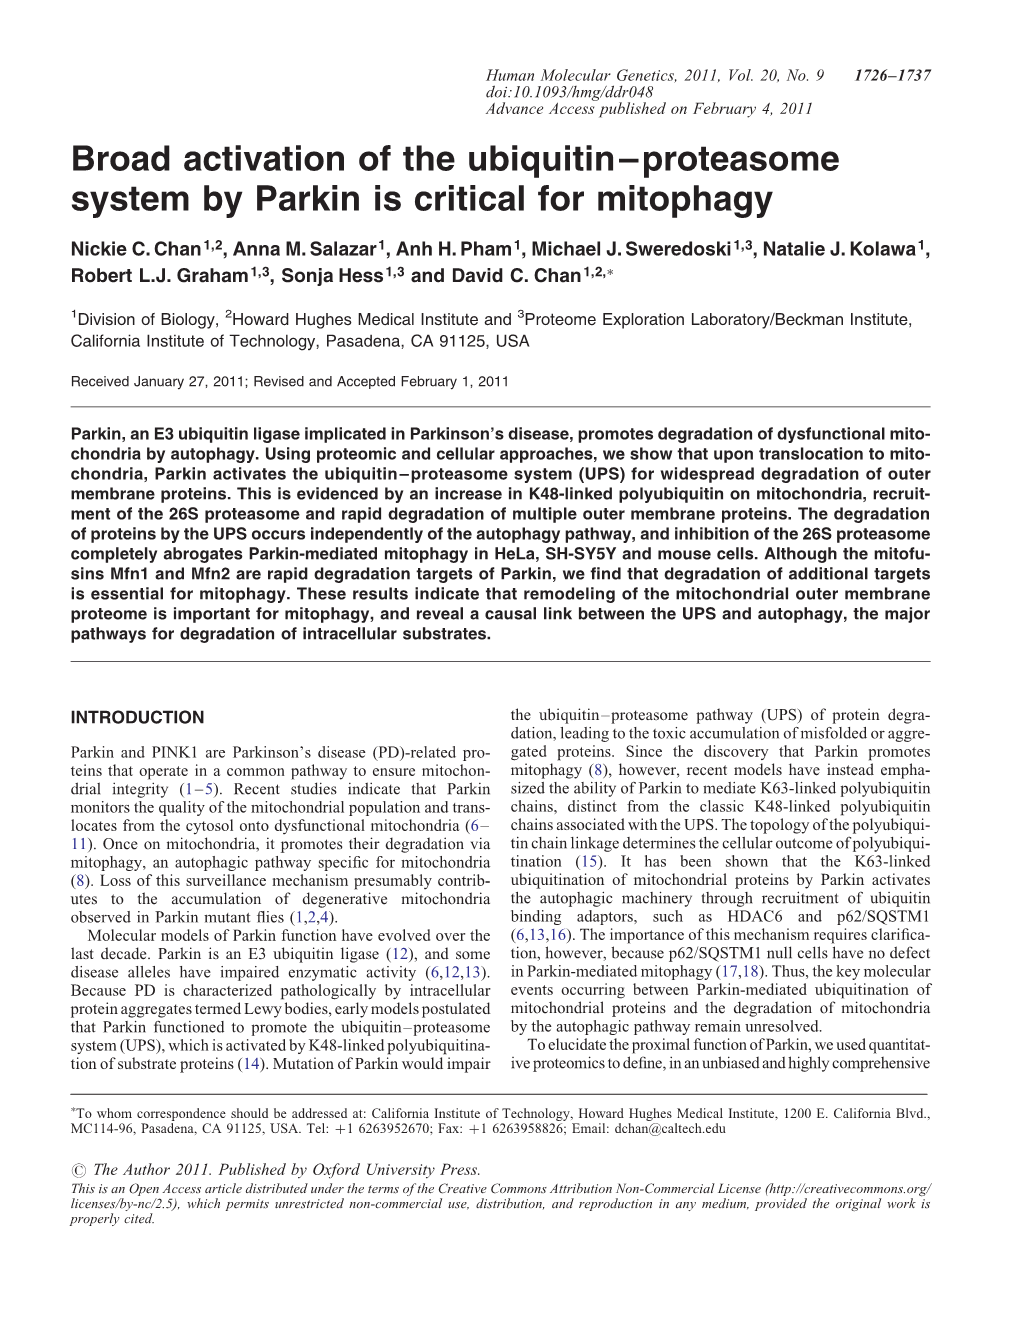 Broad Activation of the Ubiquitin–Proteasome System by Parkin Is Critical for Mitophagy